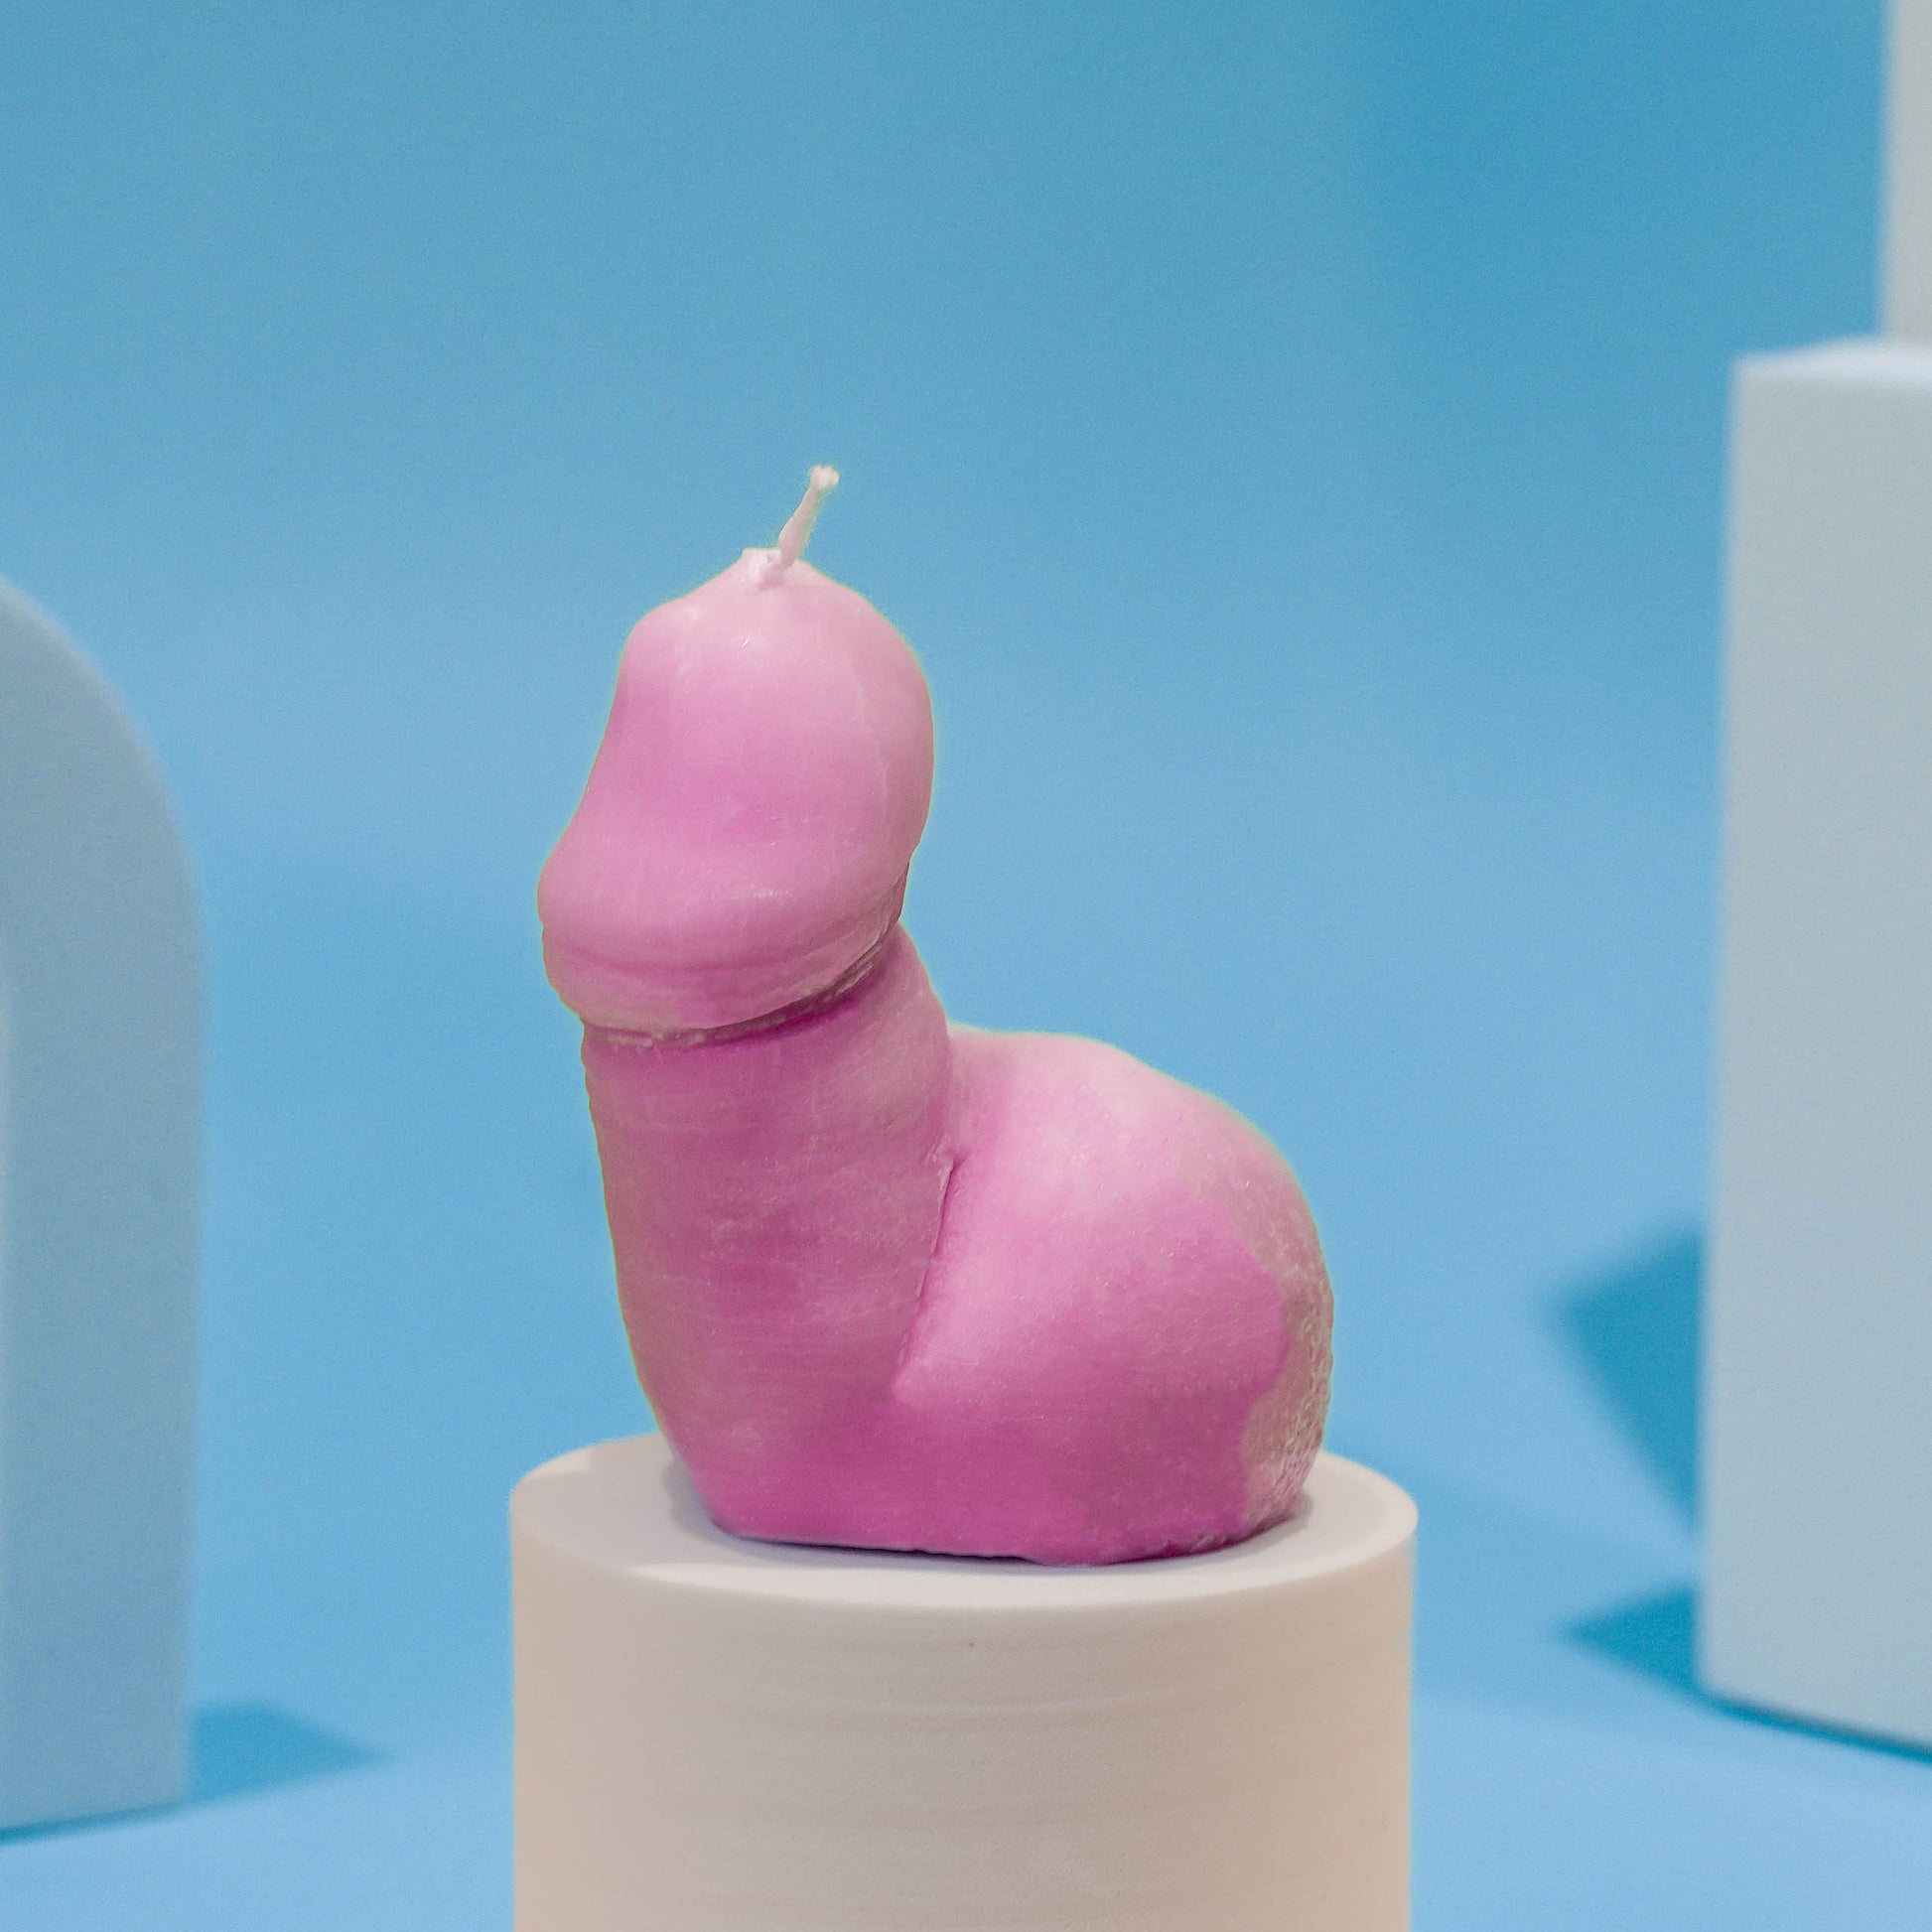 Handcrafted Giggeli penis candle, artfully designed for body positivity and inclusive self-expression"